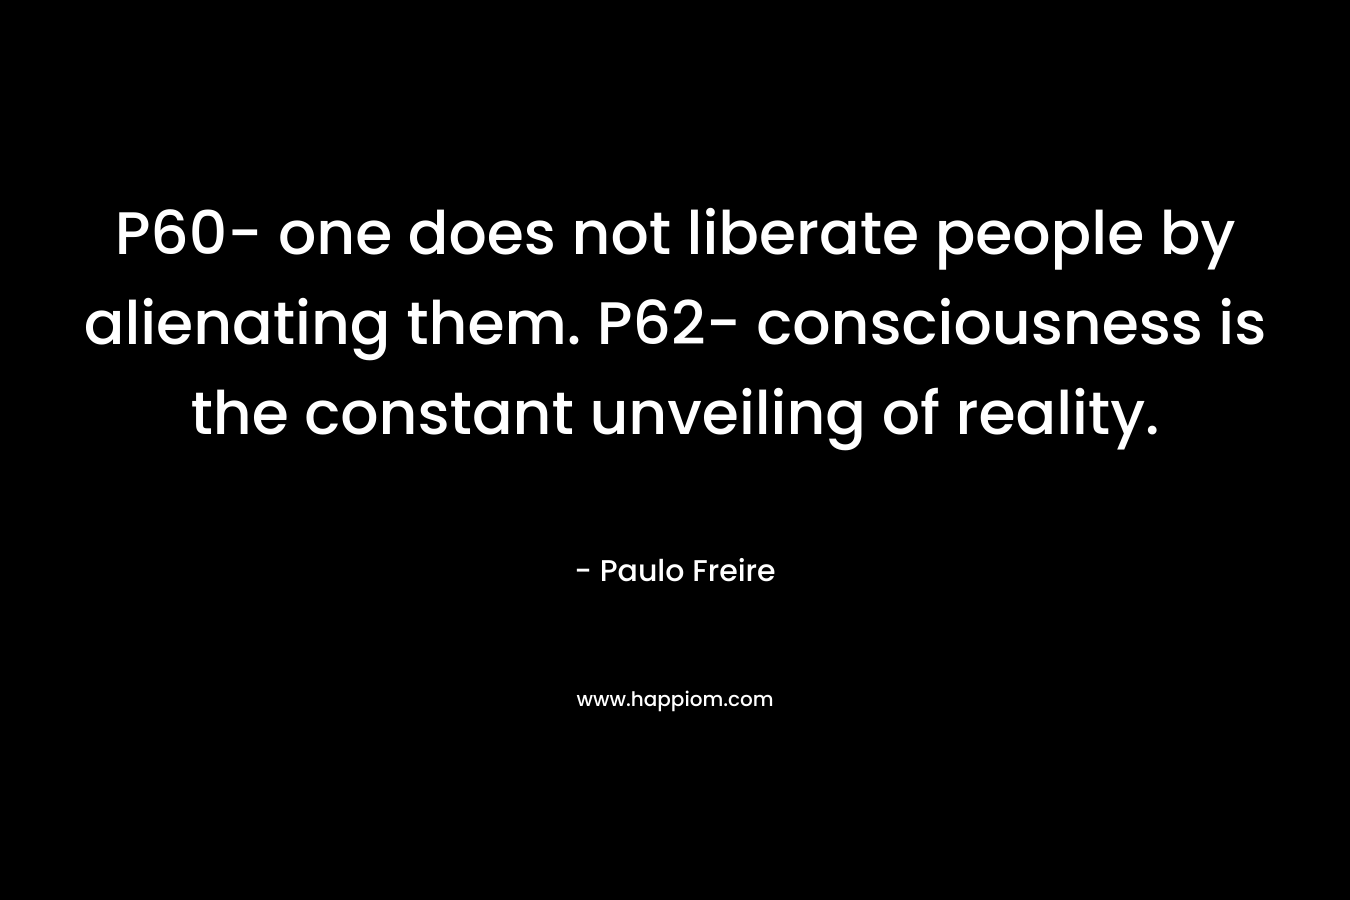 P60- one does not liberate people by alienating them. P62- consciousness is the constant unveiling of reality.